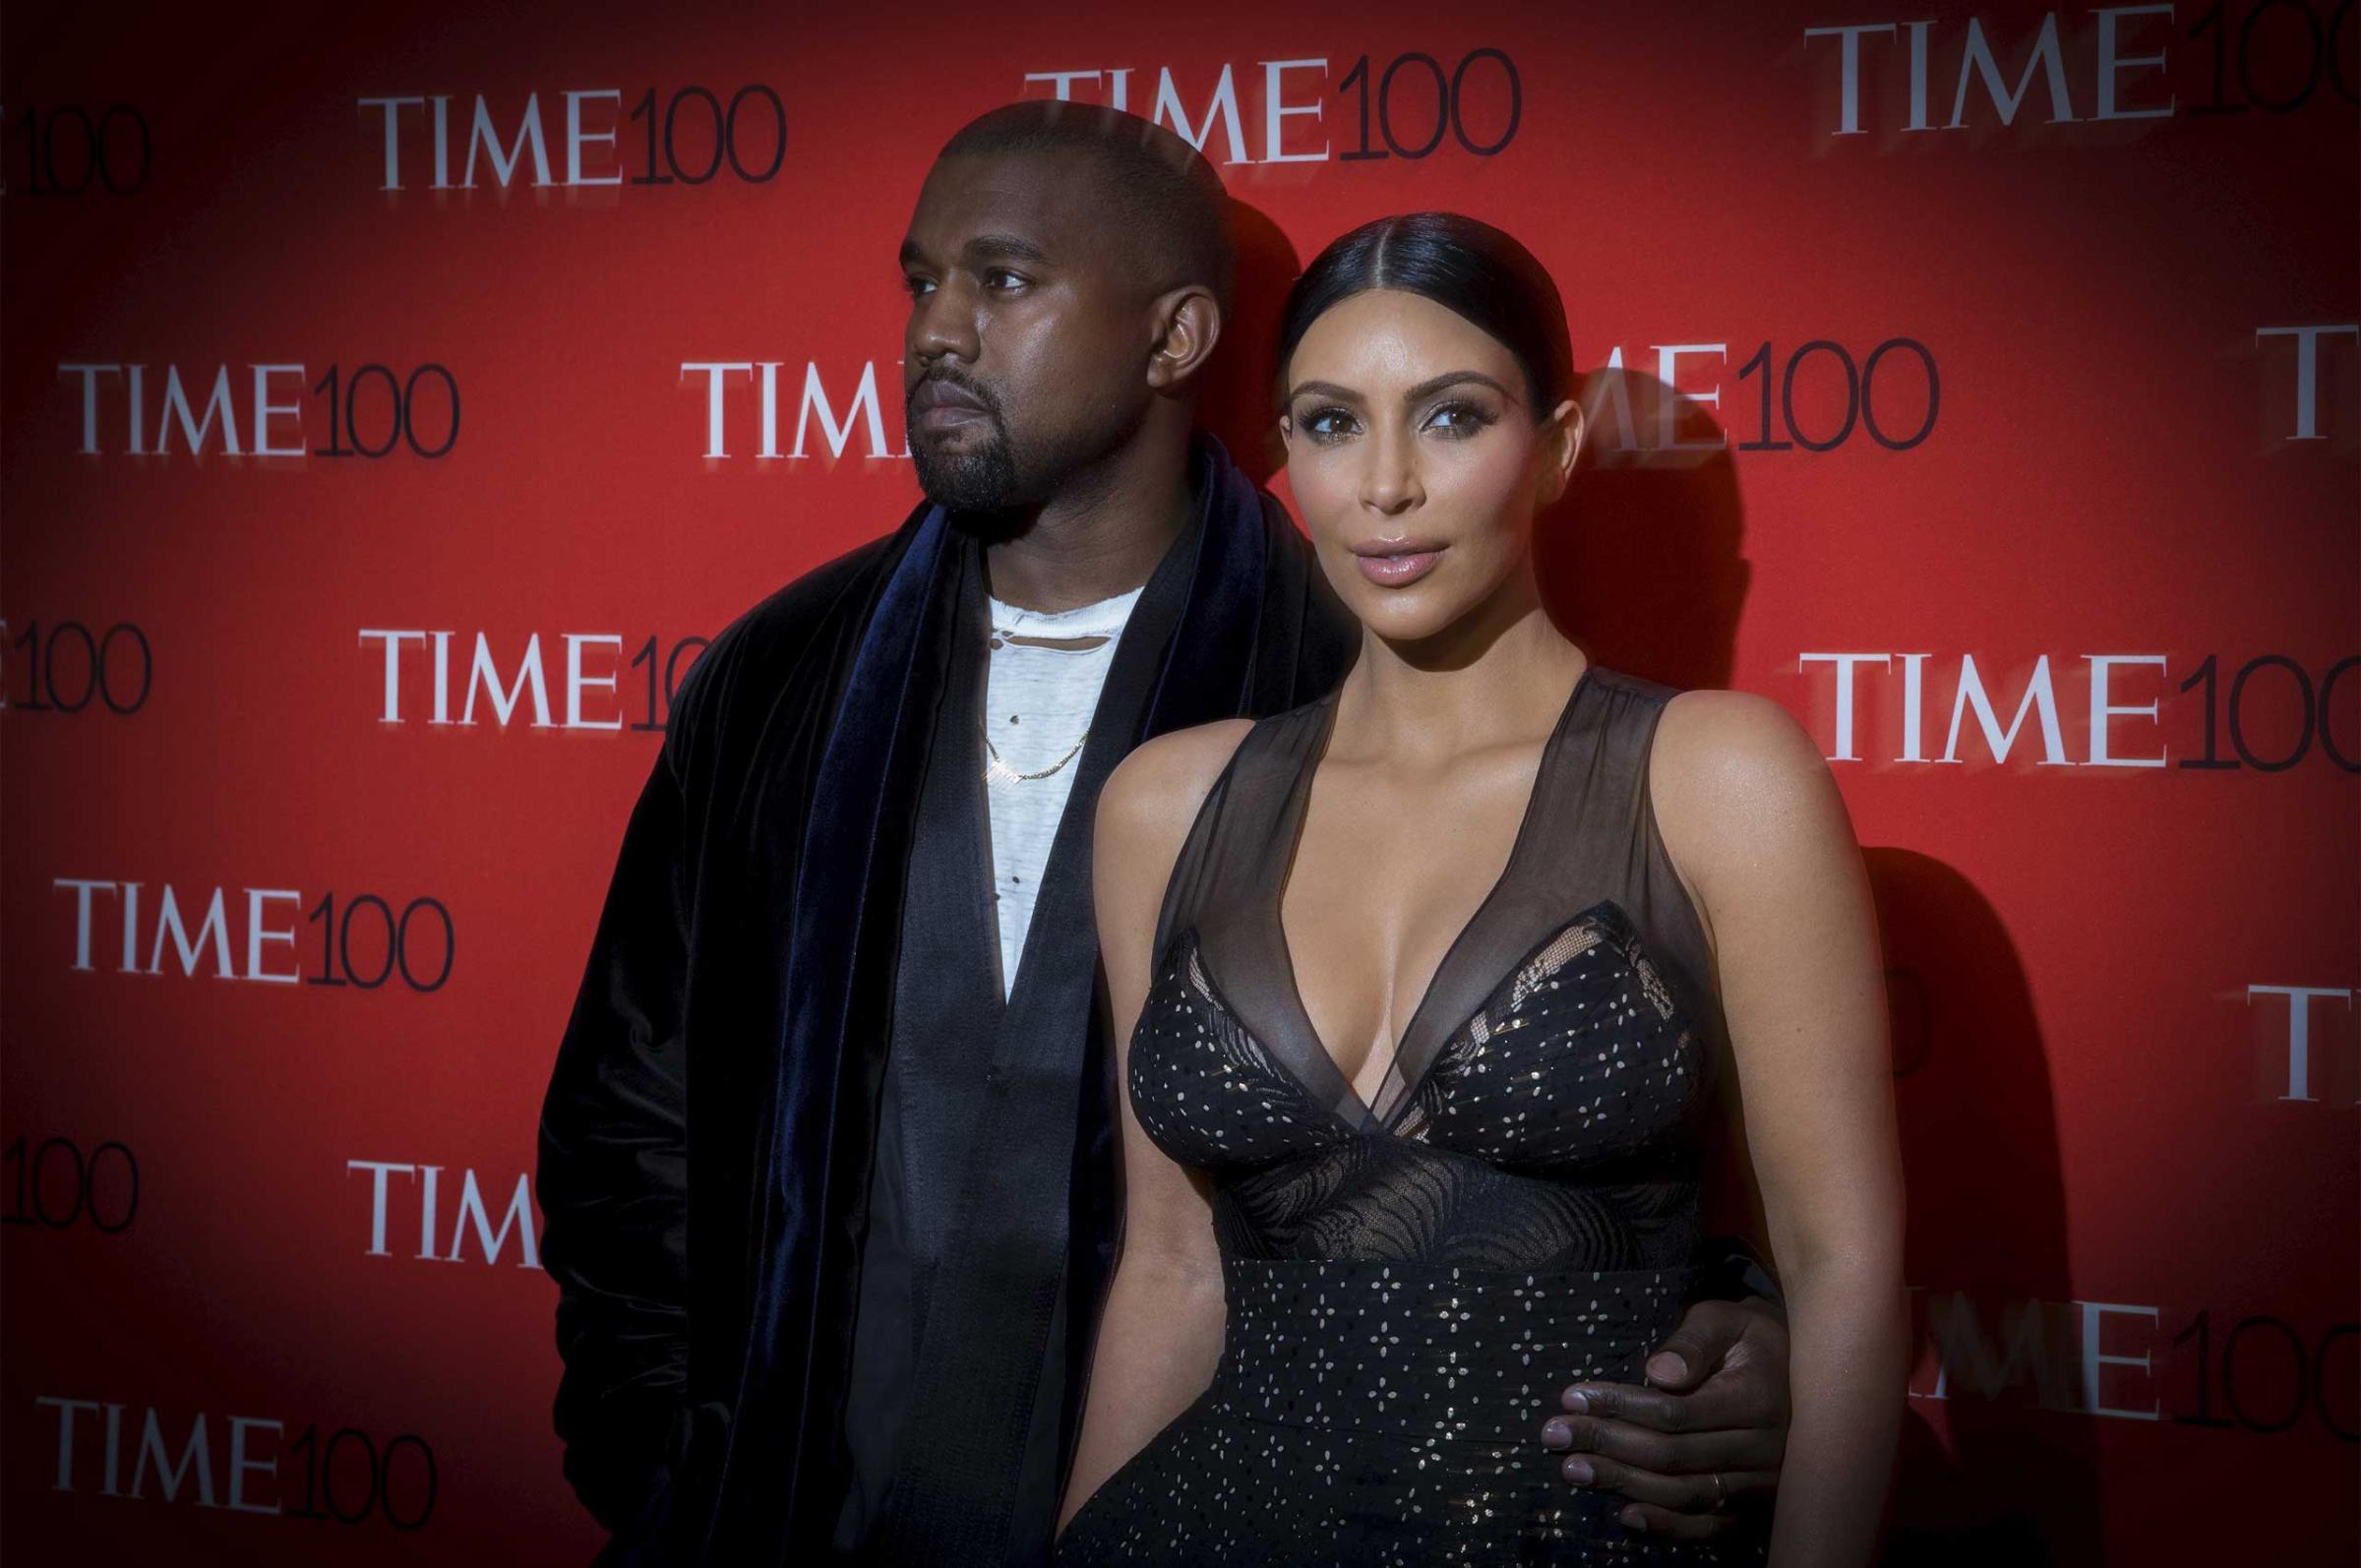 Kanye West and his wife, reality television star Kim Kardashian, arrive for the TIME 100 Gala in New York